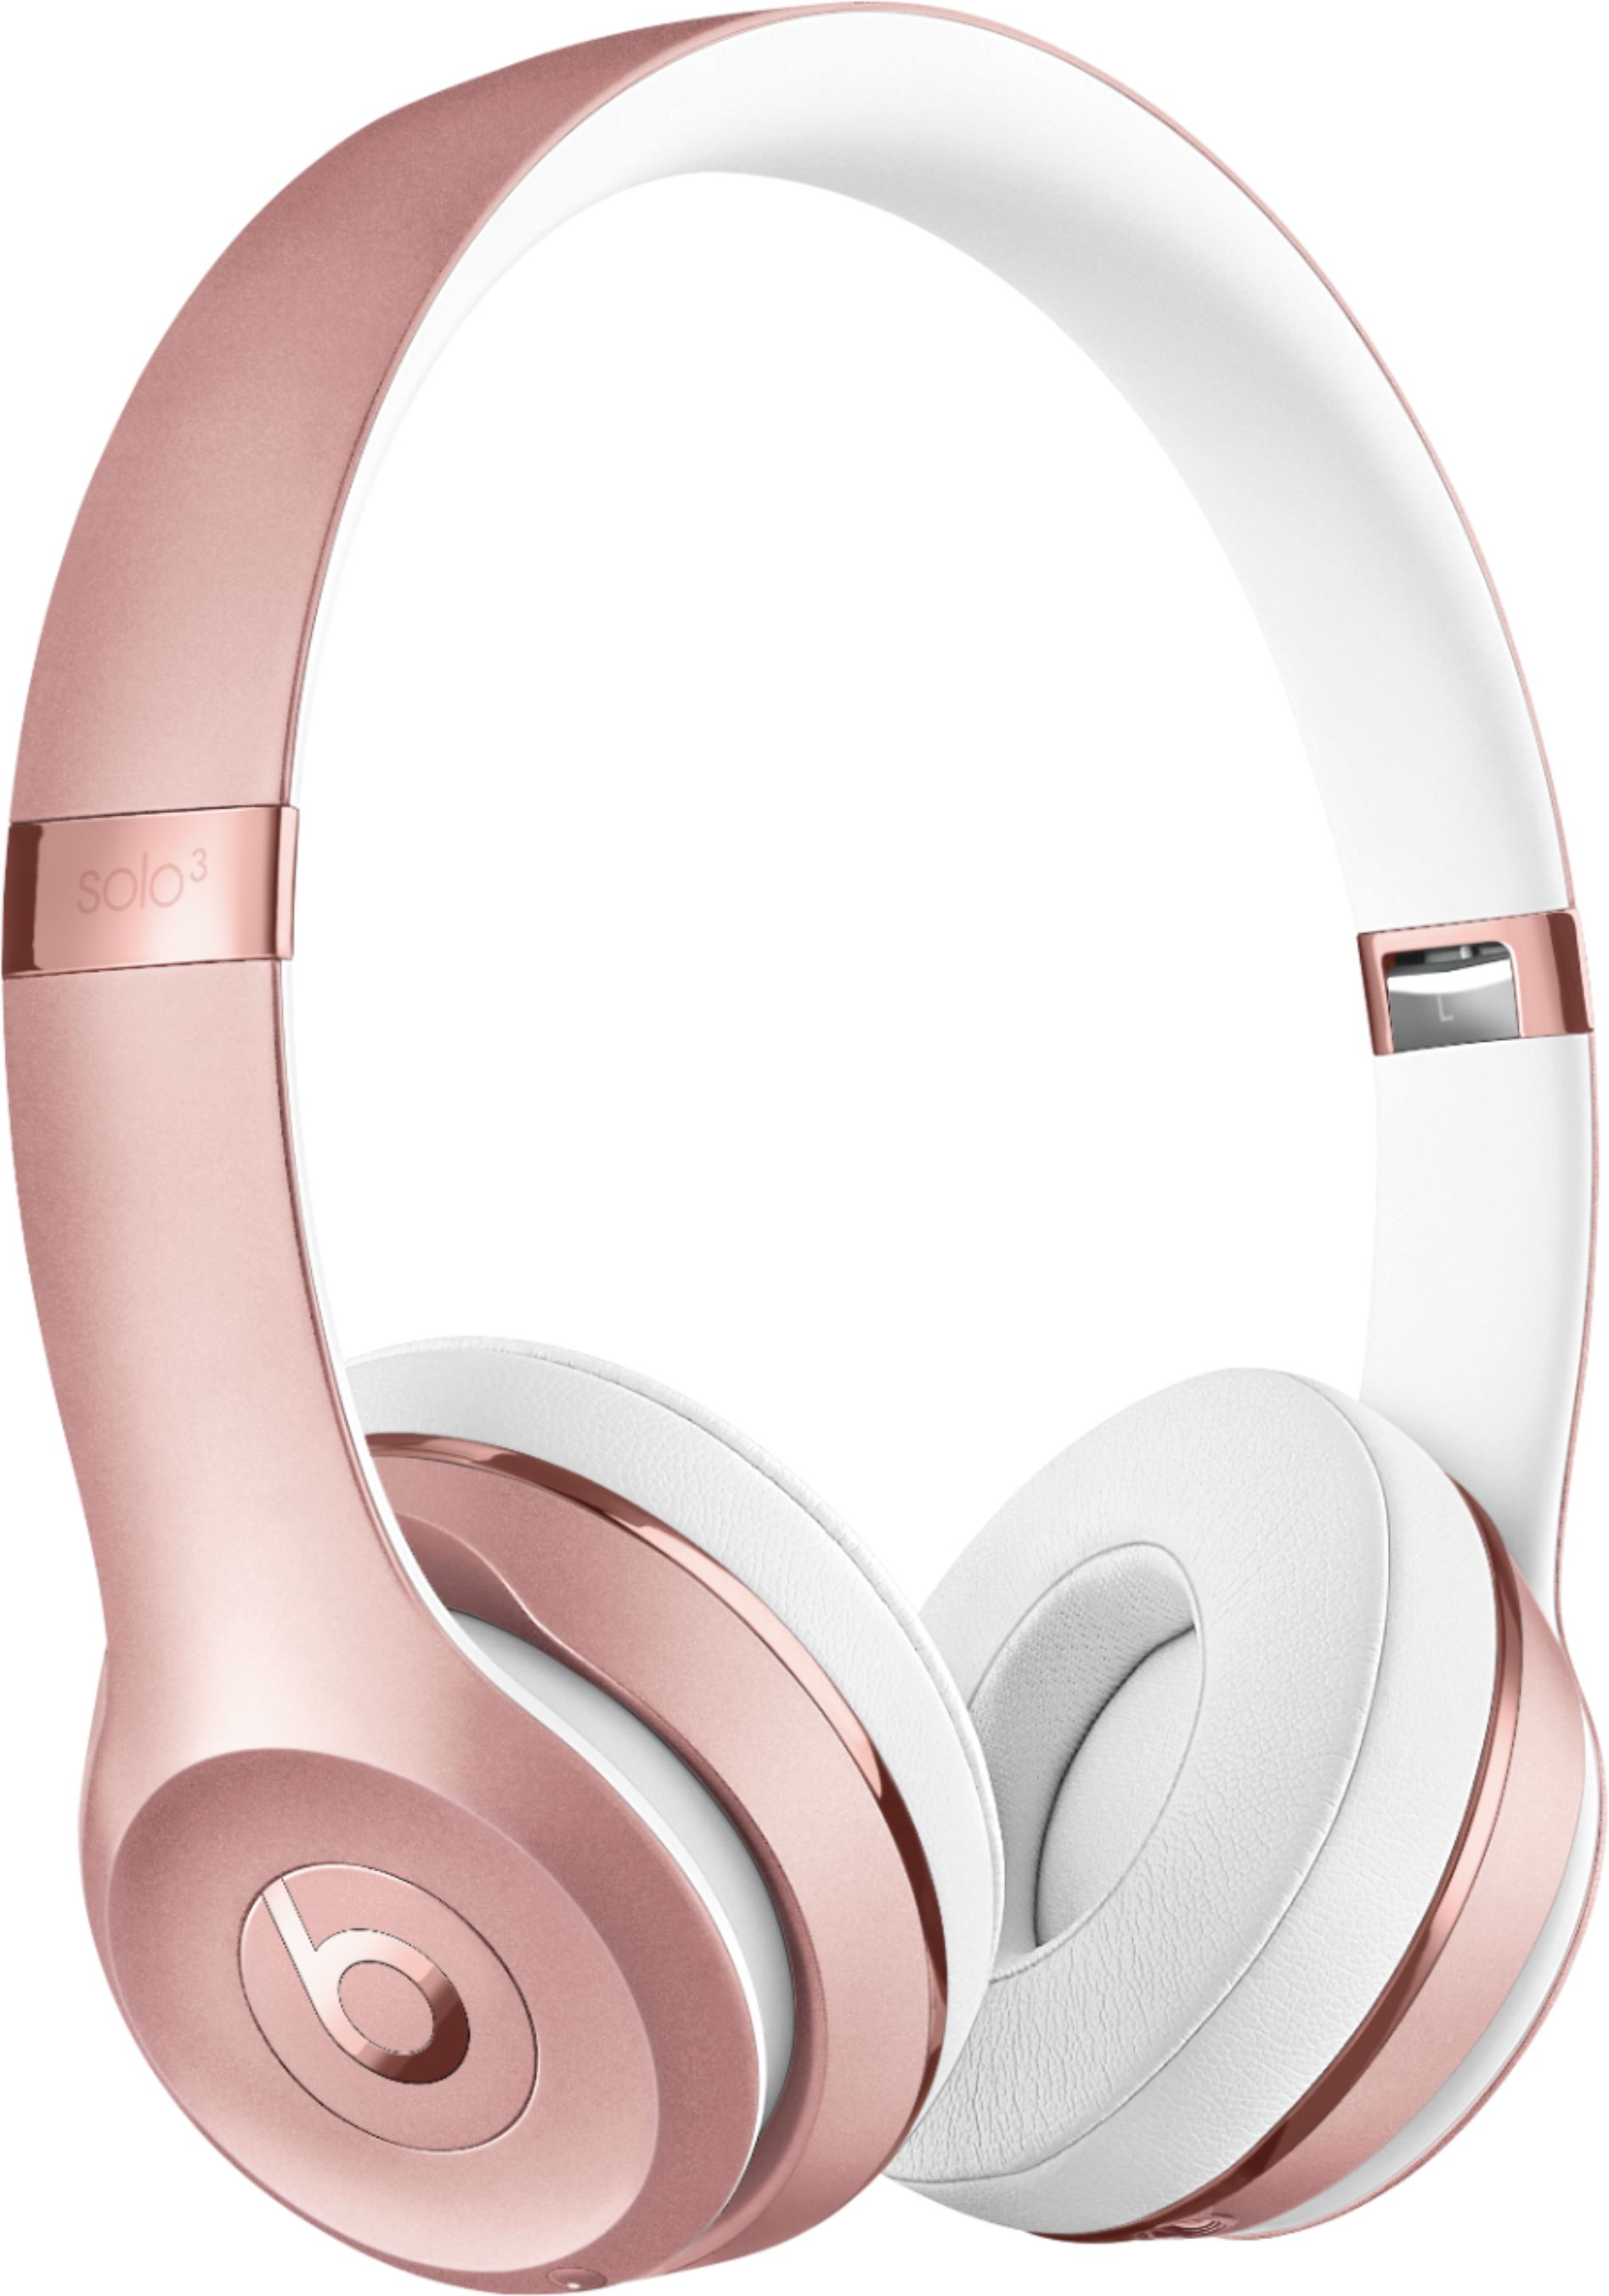 Penneven Snor raid Beats by Dr. Dre Solo³ Wireless On-Ear Headphones Rose Gold MX442LL/A -  Best Buy